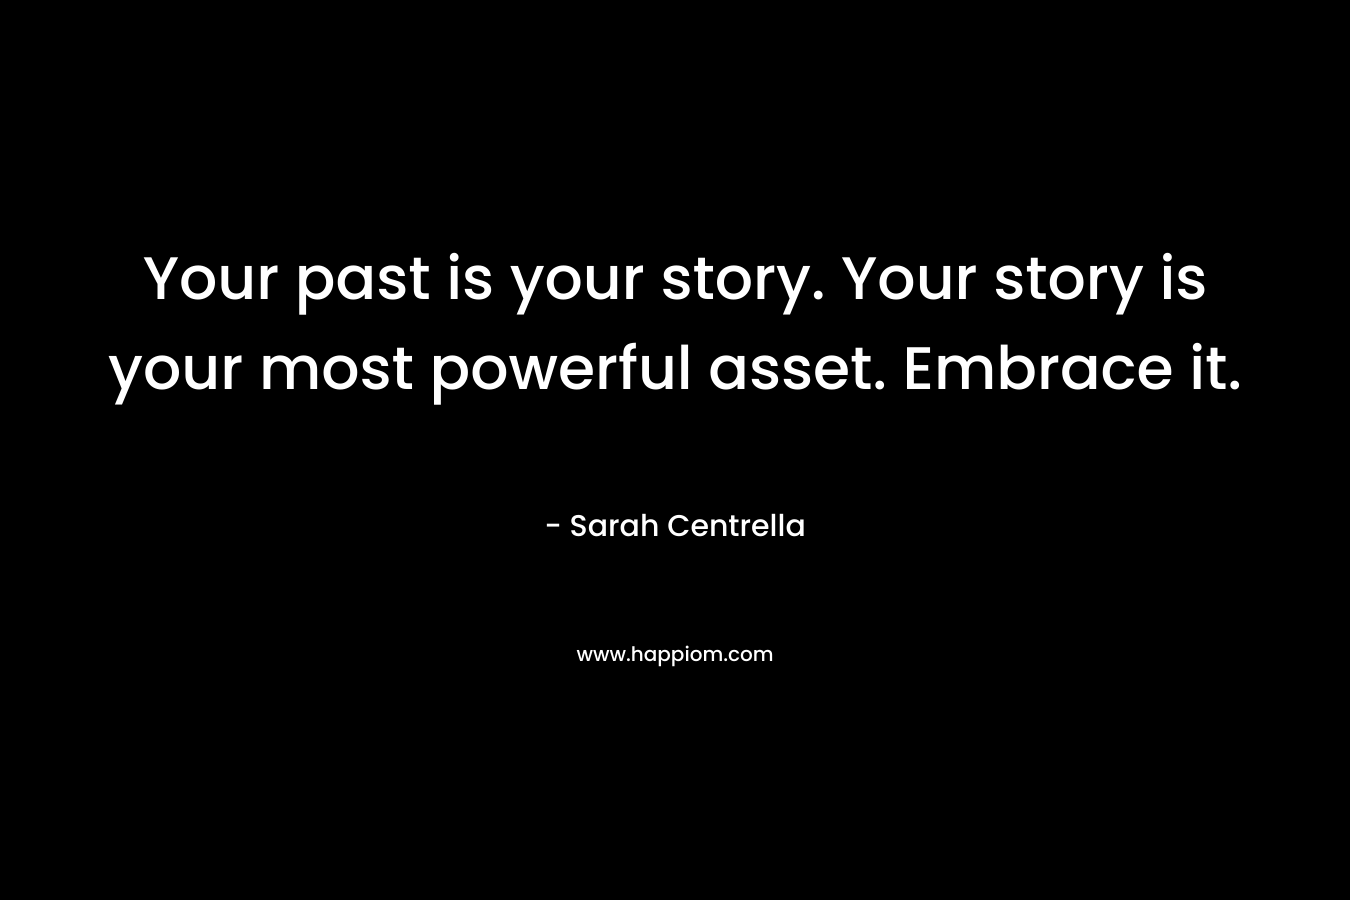 Your past is your story. Your story is your most powerful asset. Embrace it.